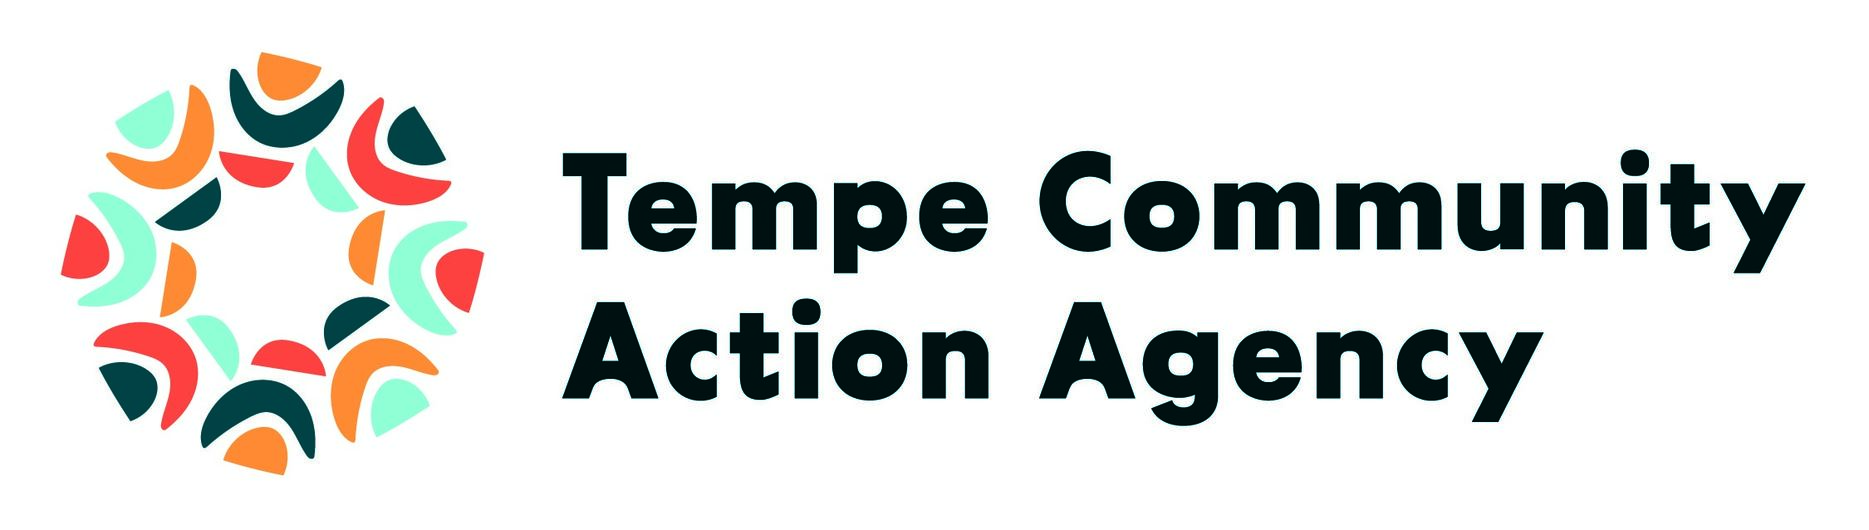 Tempe Community Action Agency Login